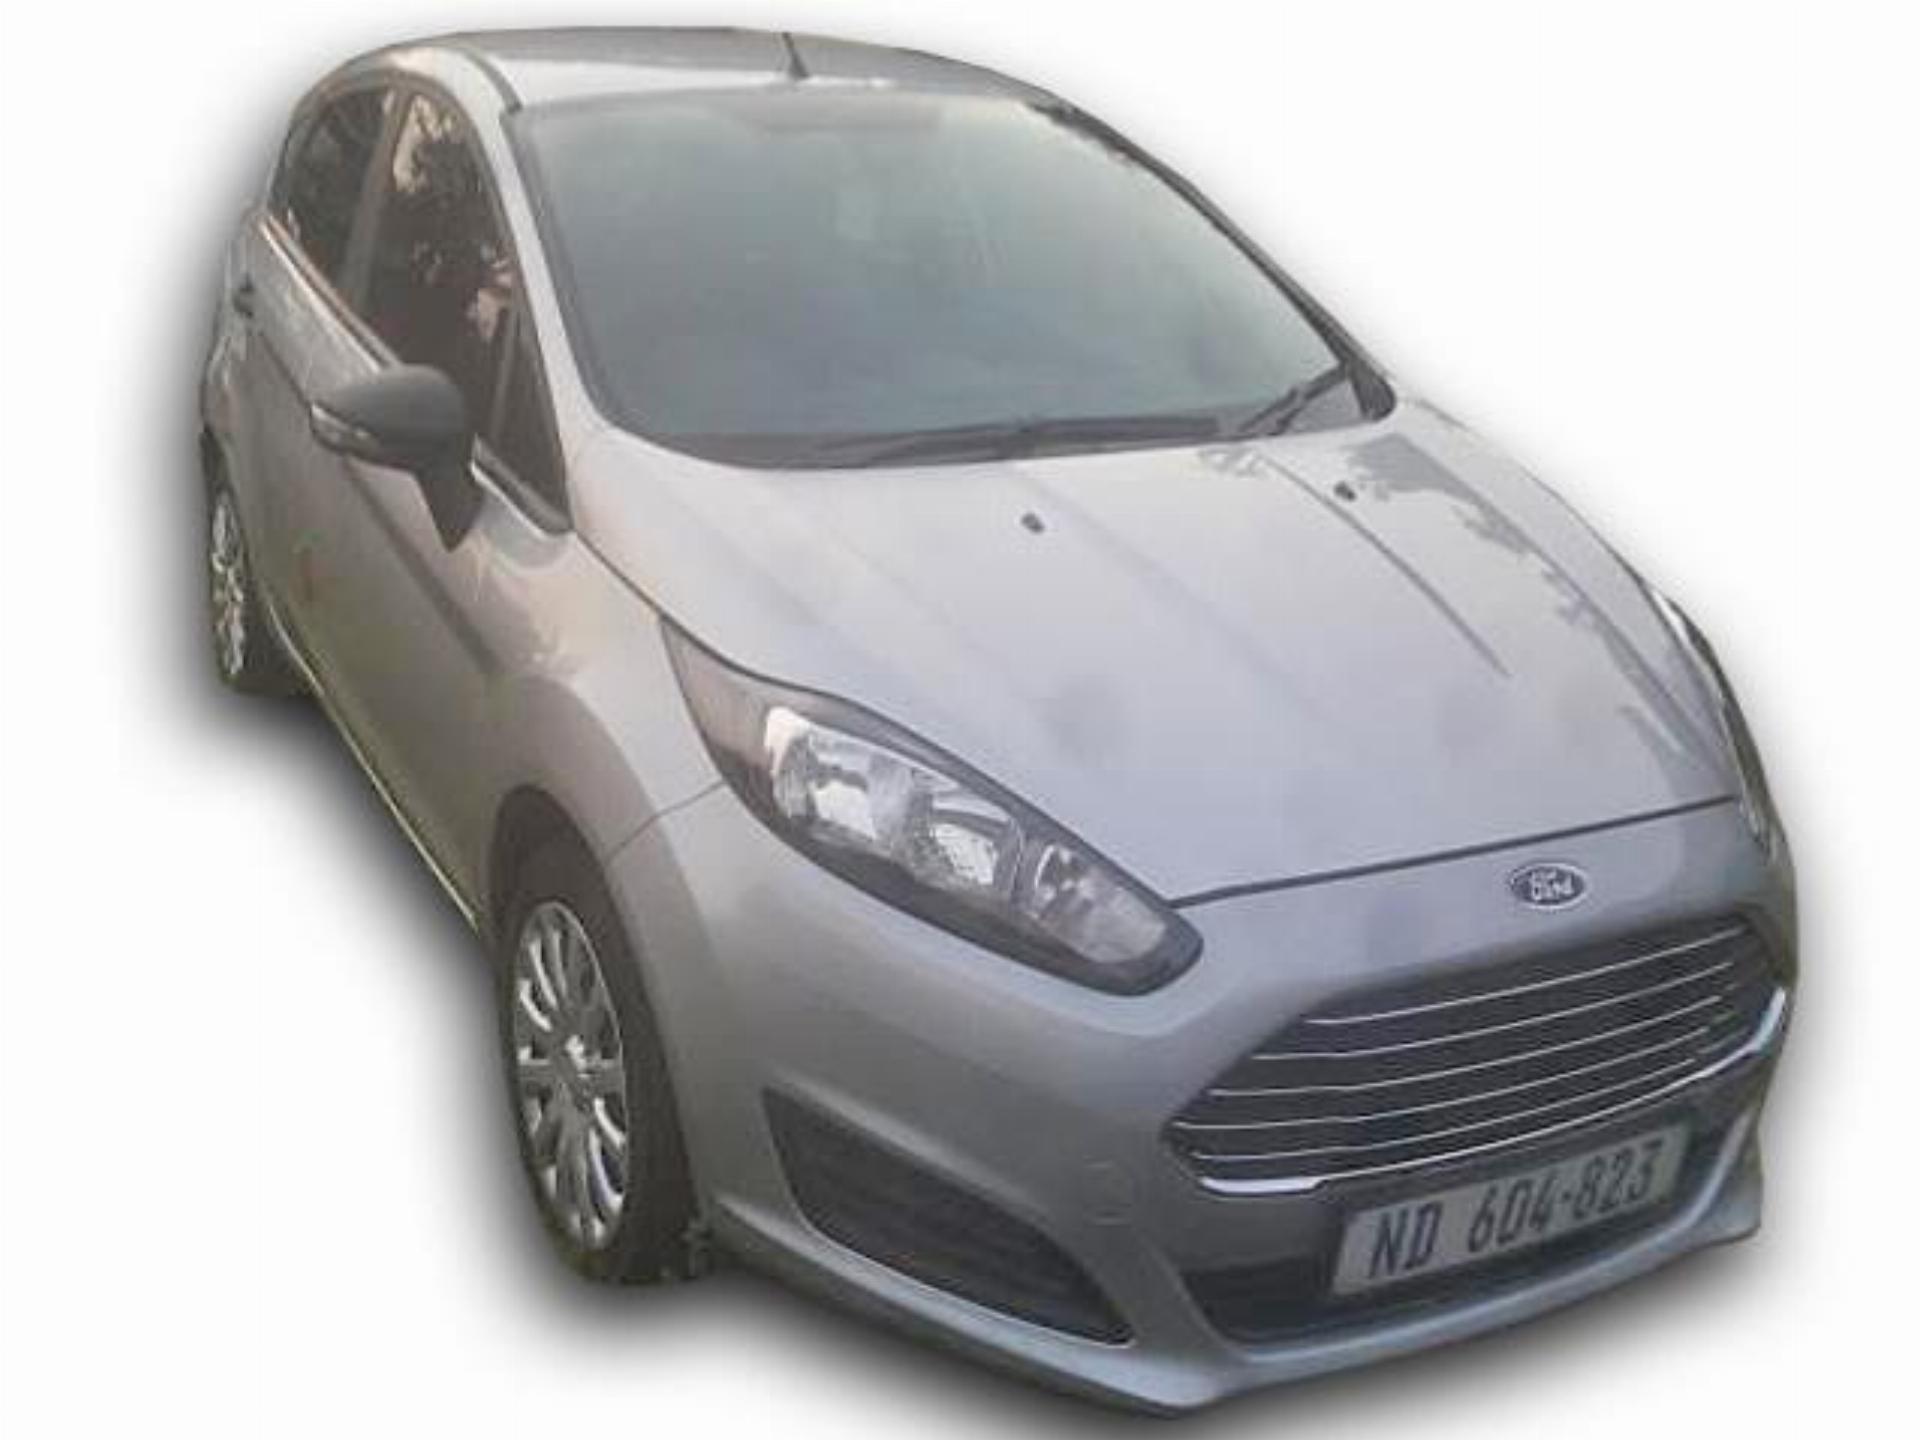 Ford Fiesta 1.4 Trend 5DR